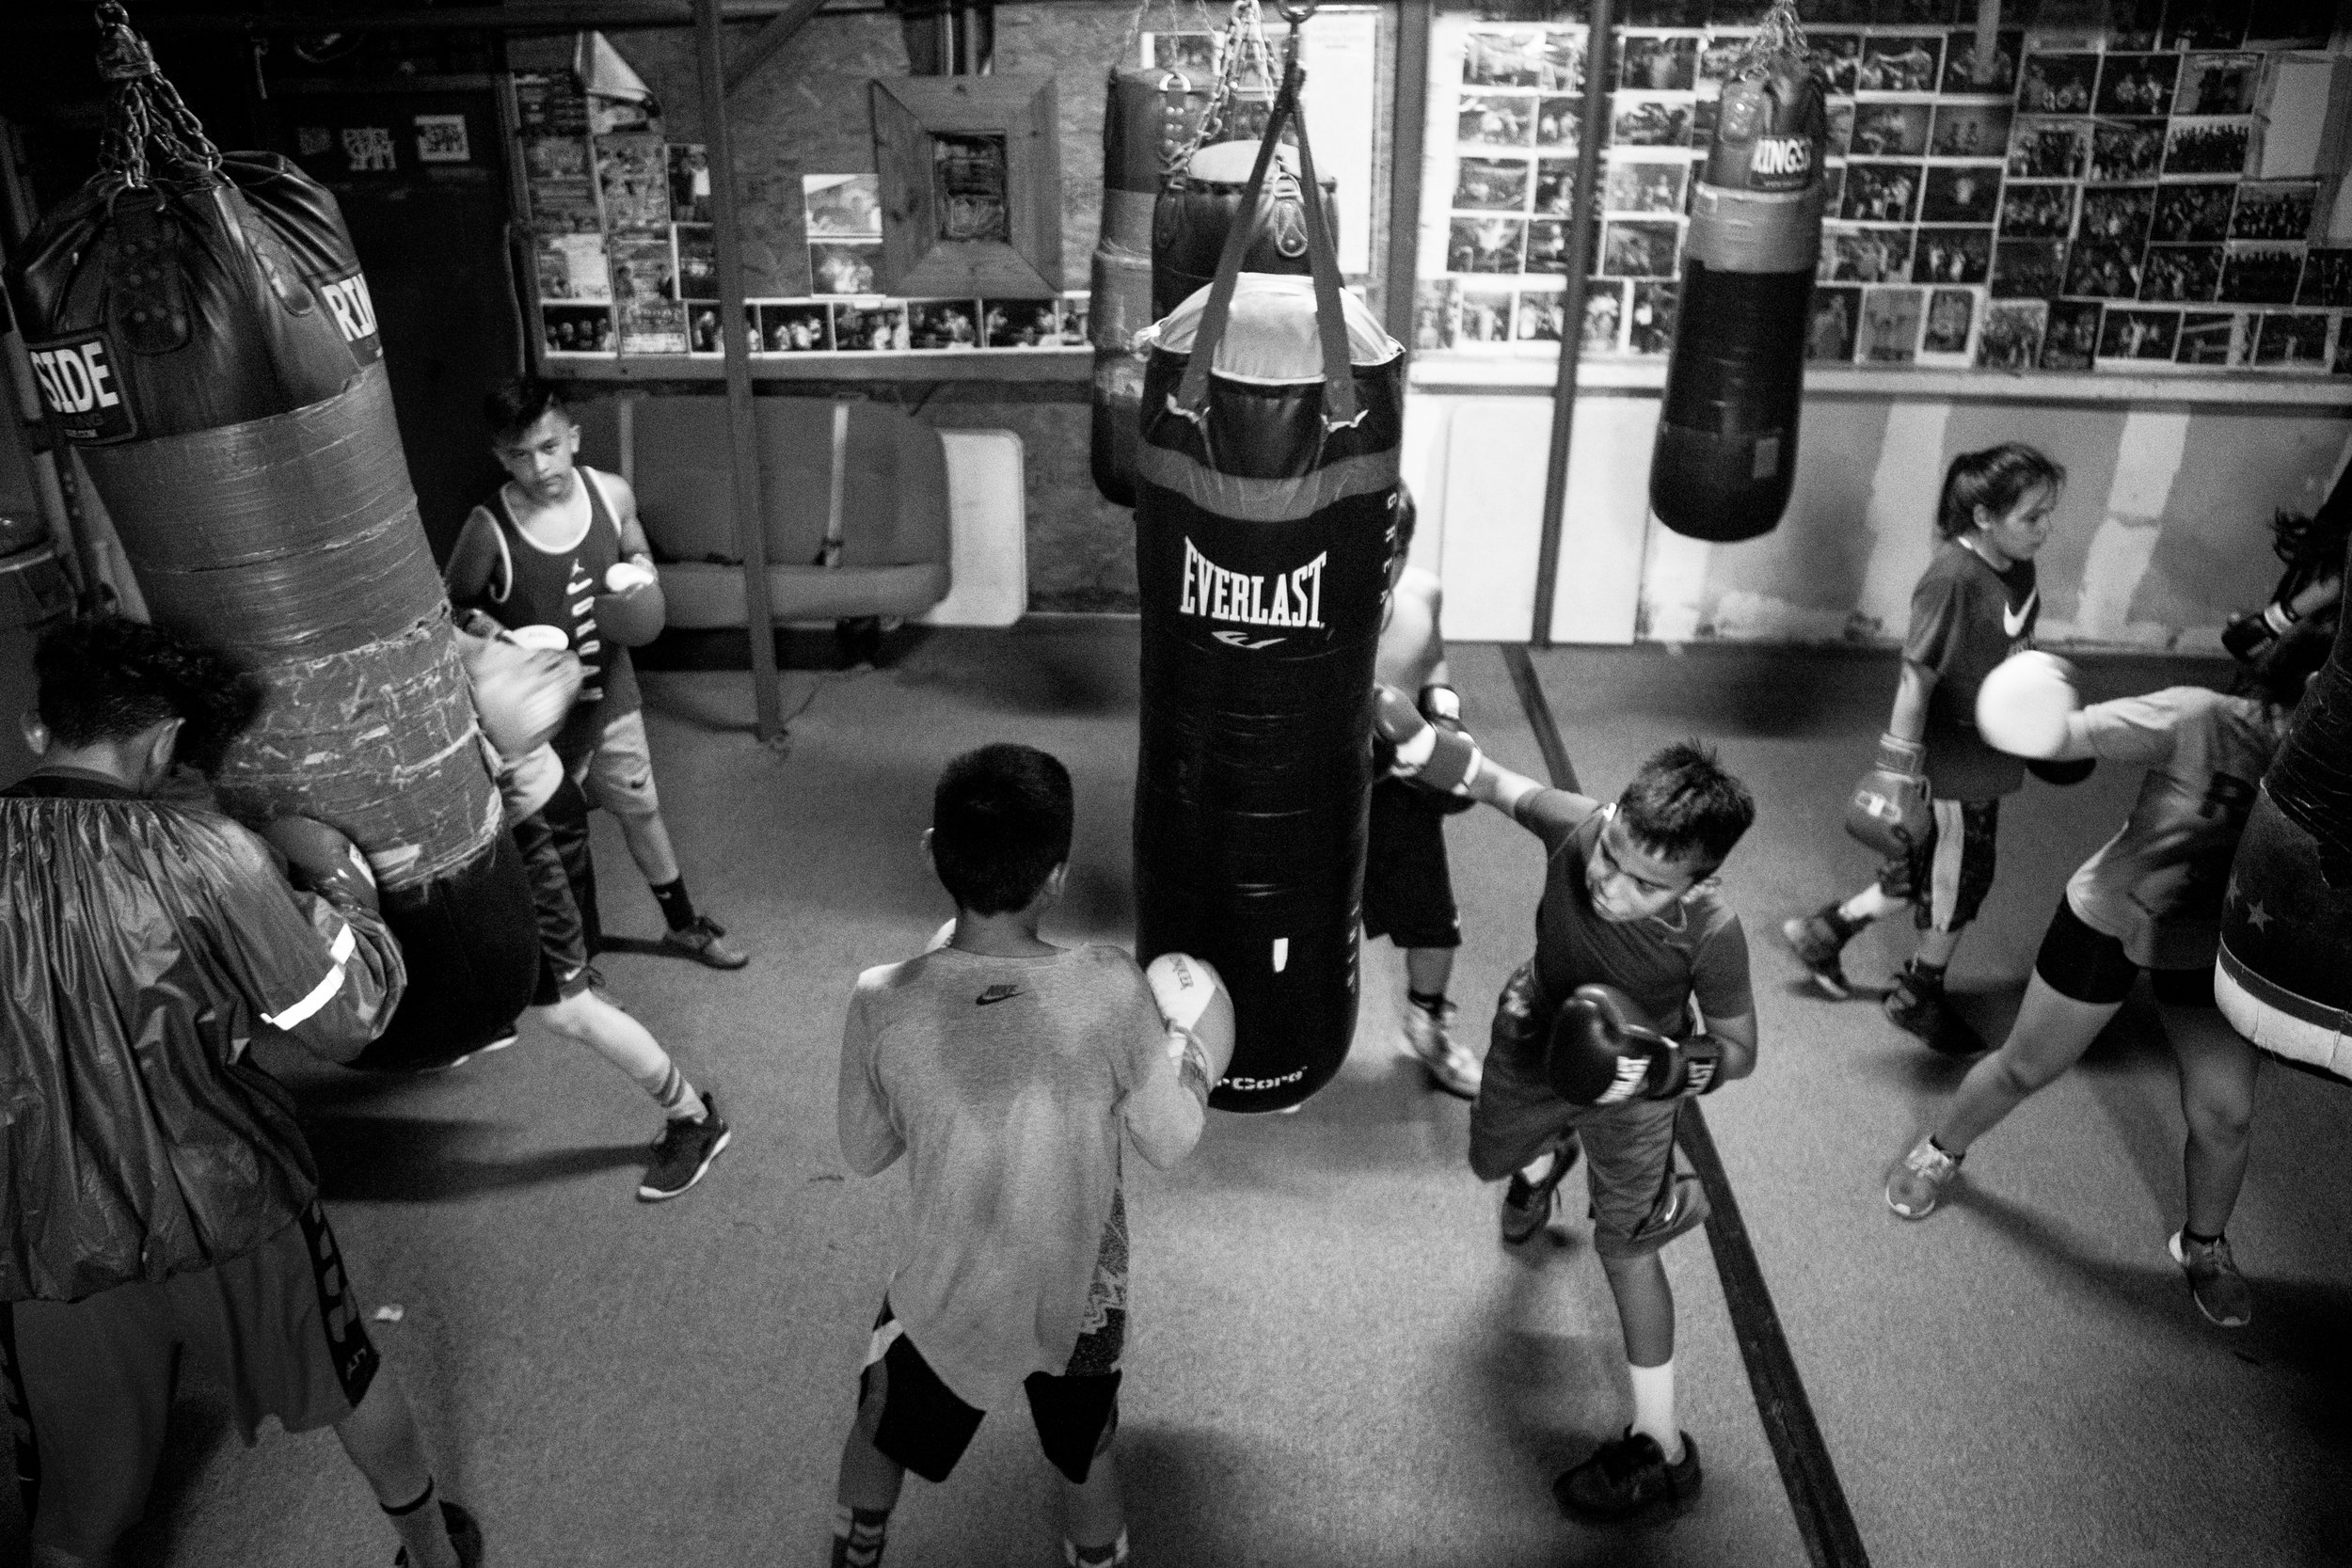  Victor De Los Santos Jr., 12, center, punches a bag at the Ramos Boxing gym with other members of the Junior Olympics team.&nbsp;Many of the young athletes devote hours in the gym to continue a family tradition they say "runs in their blood." 